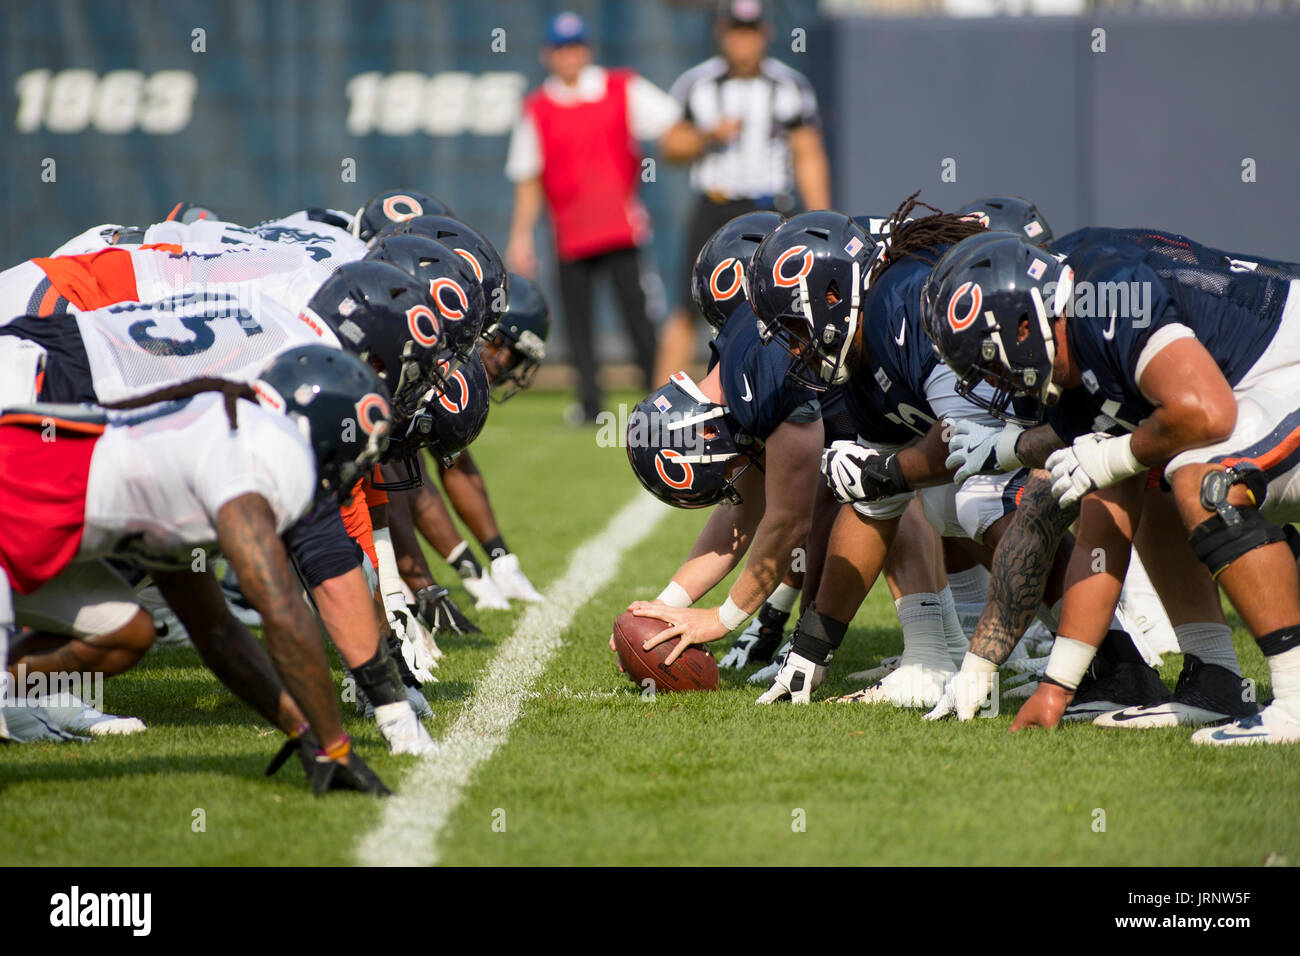 Chicago, Illinois, USA. 5th August, 2017. Chicago Bears players line up for scrimmage during training camp at Soldier Field in Chicago, IL. Credit: Cal Sport Media/Alamy Live News Stock Photo